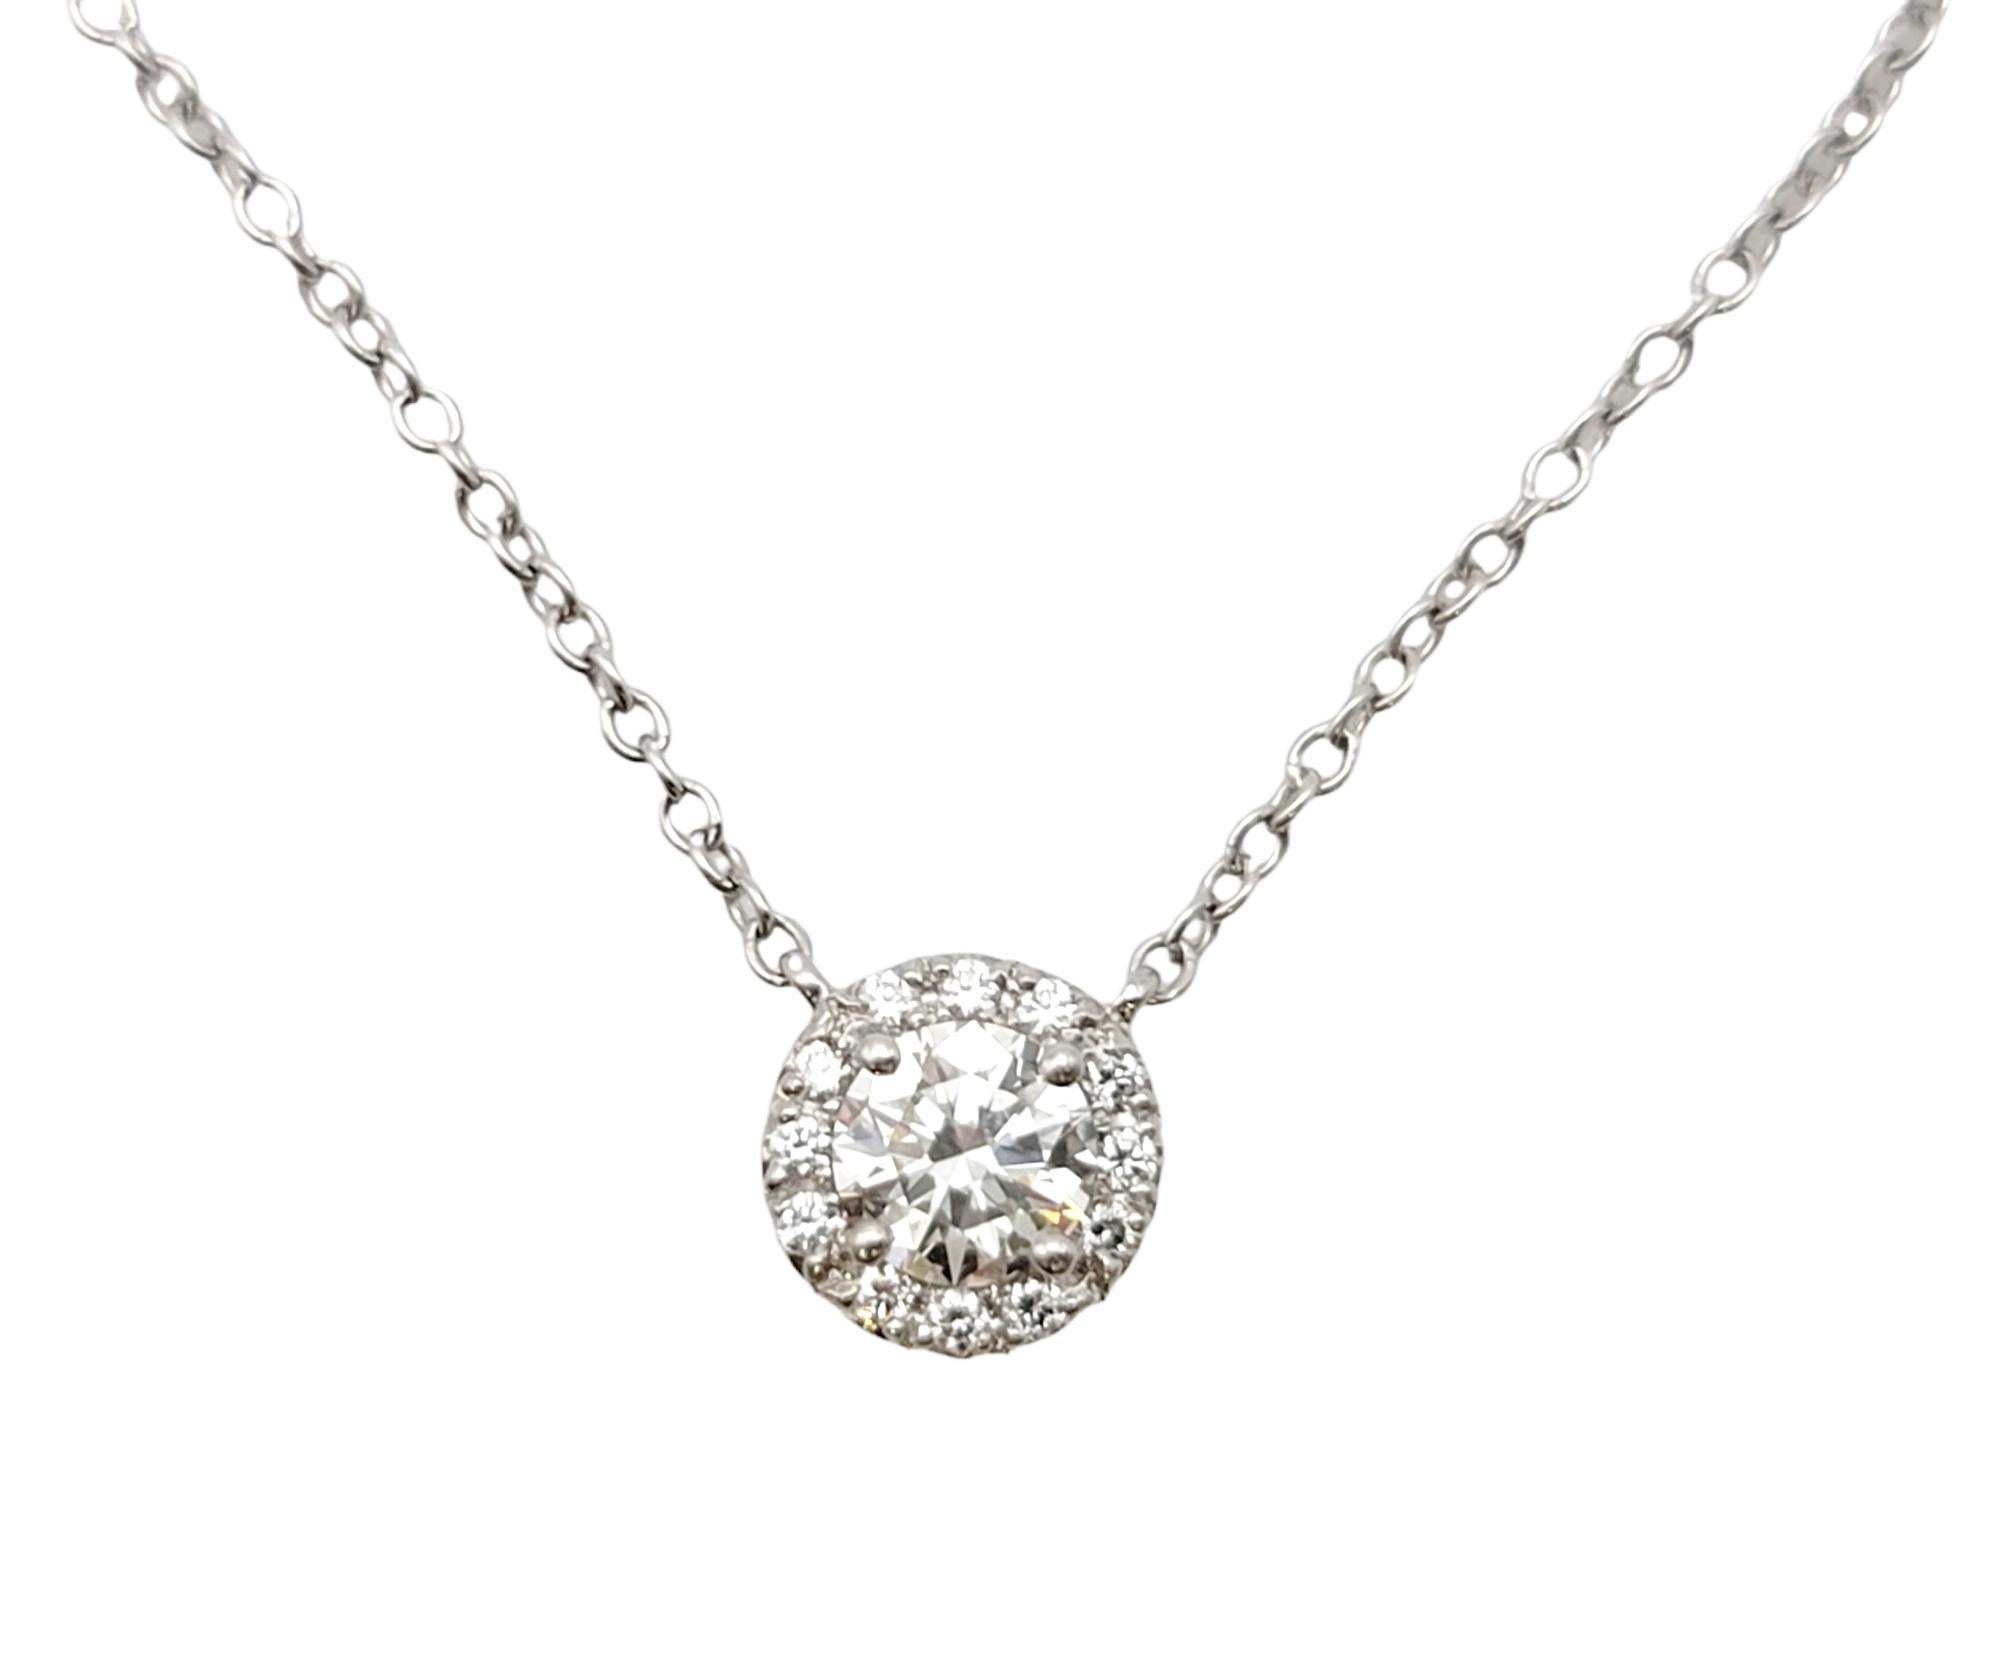 This sparkling Tiffany & Co. Soleste diamond halo pendant necklace is stunningly simple, yet undeniably beautiful. The delicate platinum chain and icy circle of natural round diamonds goes with just about everything. It features a single round